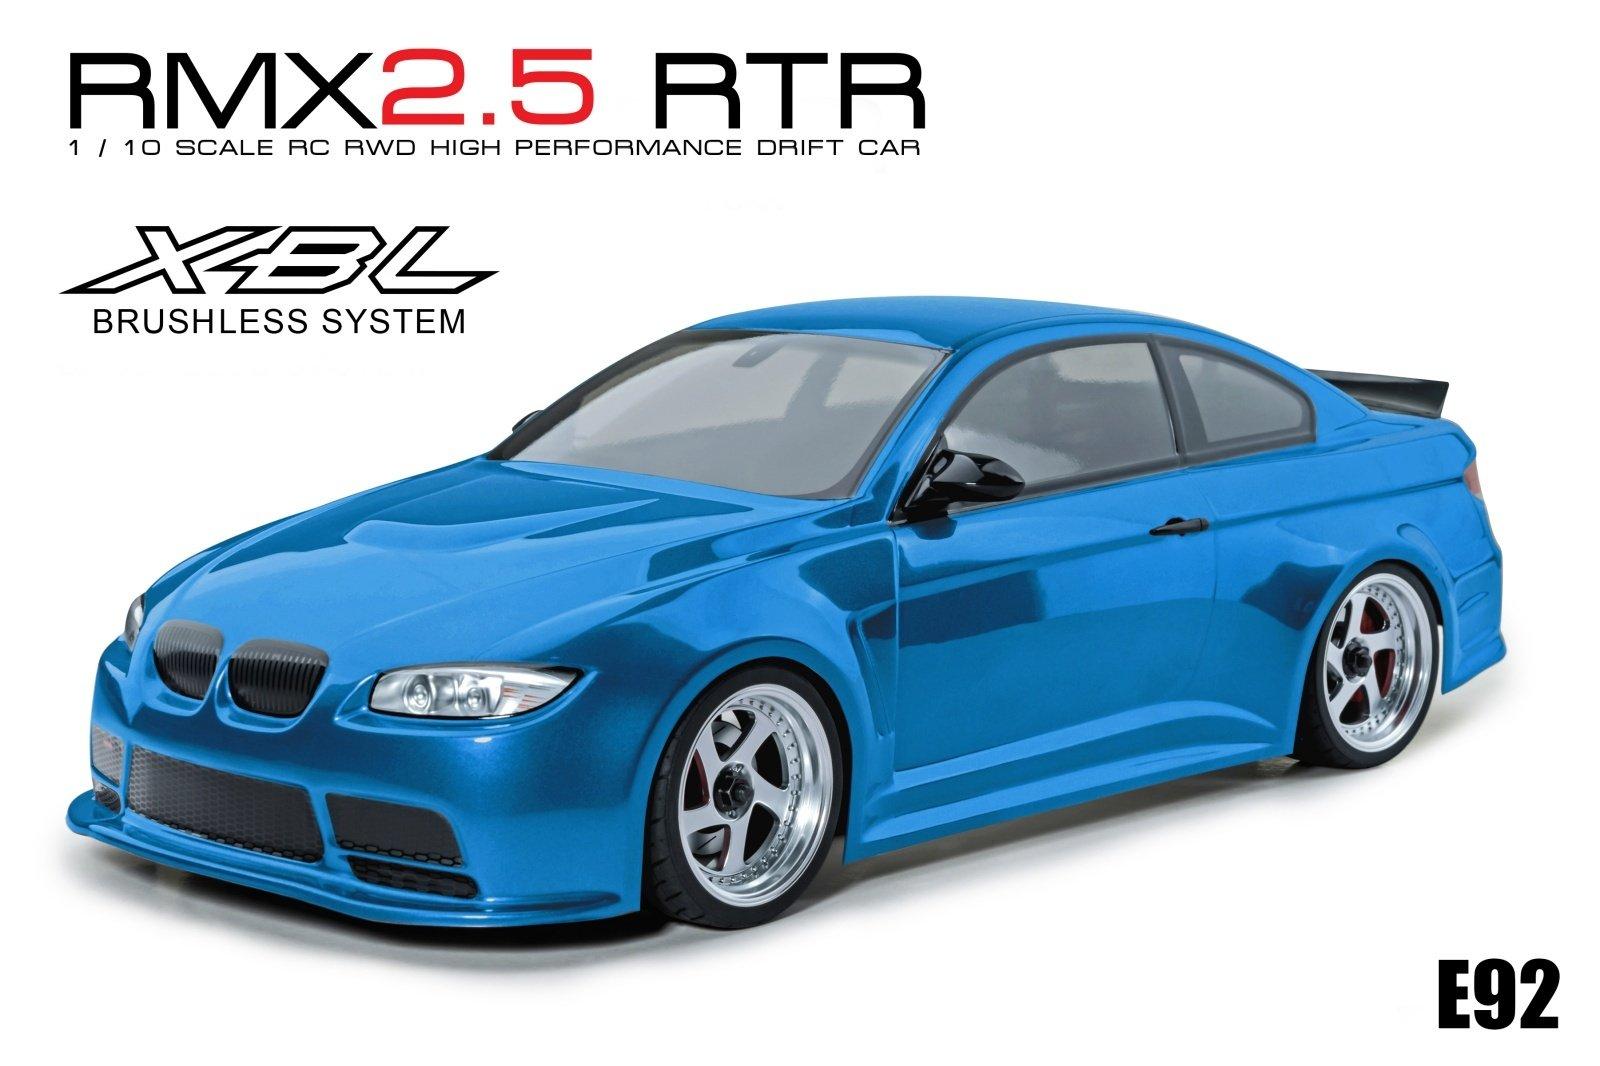 Ready To Run Rtr Rc Drift Cars: Top-rated websites for buying RTR RC drift cars